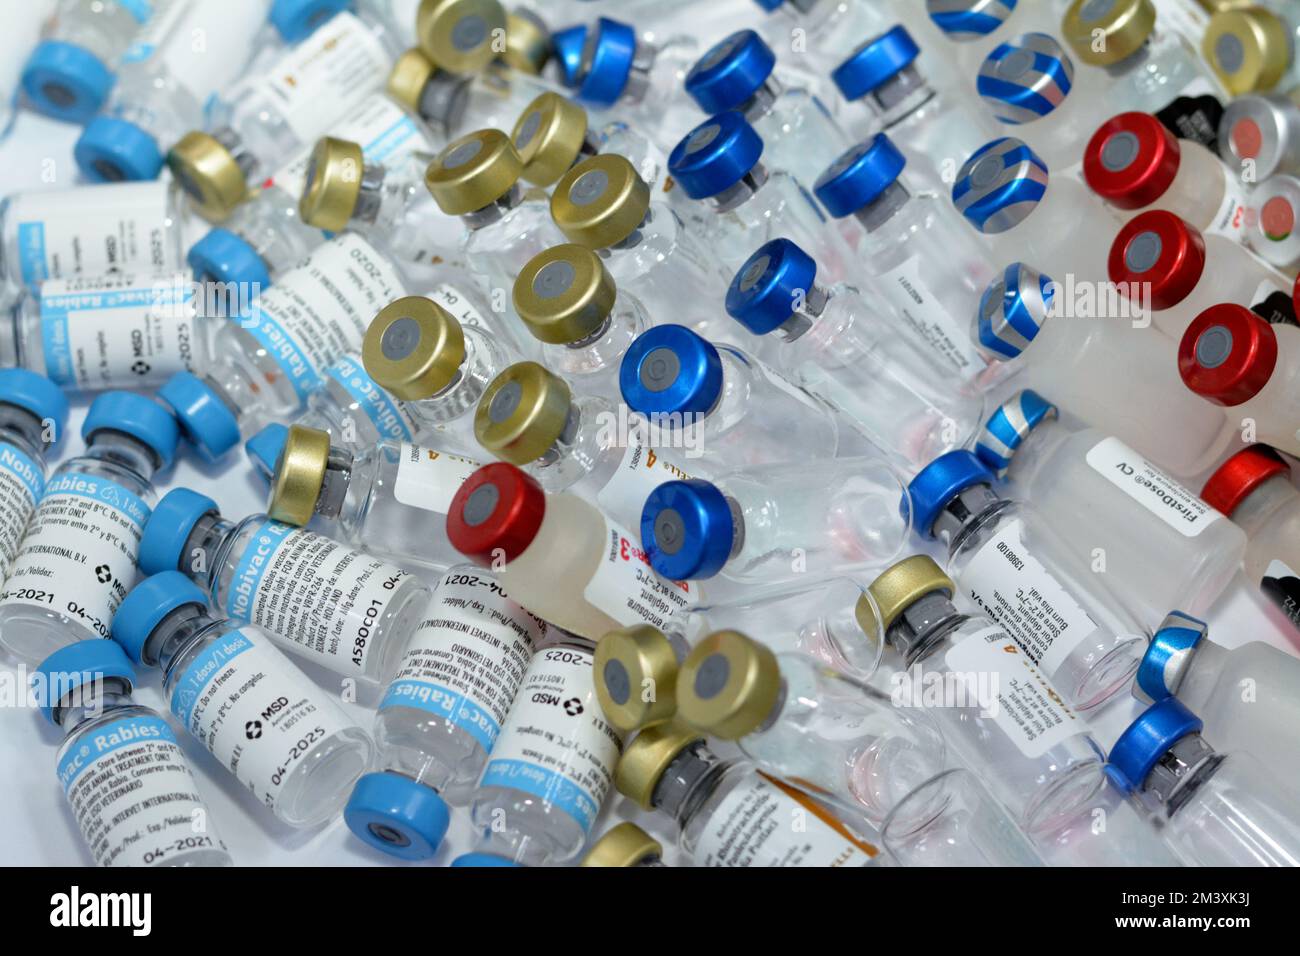 Cairo, Egypt, December 8 2022: Background of various and different types of animal vaccines for cats, dogs and other animals against various viruses a Stock Photo